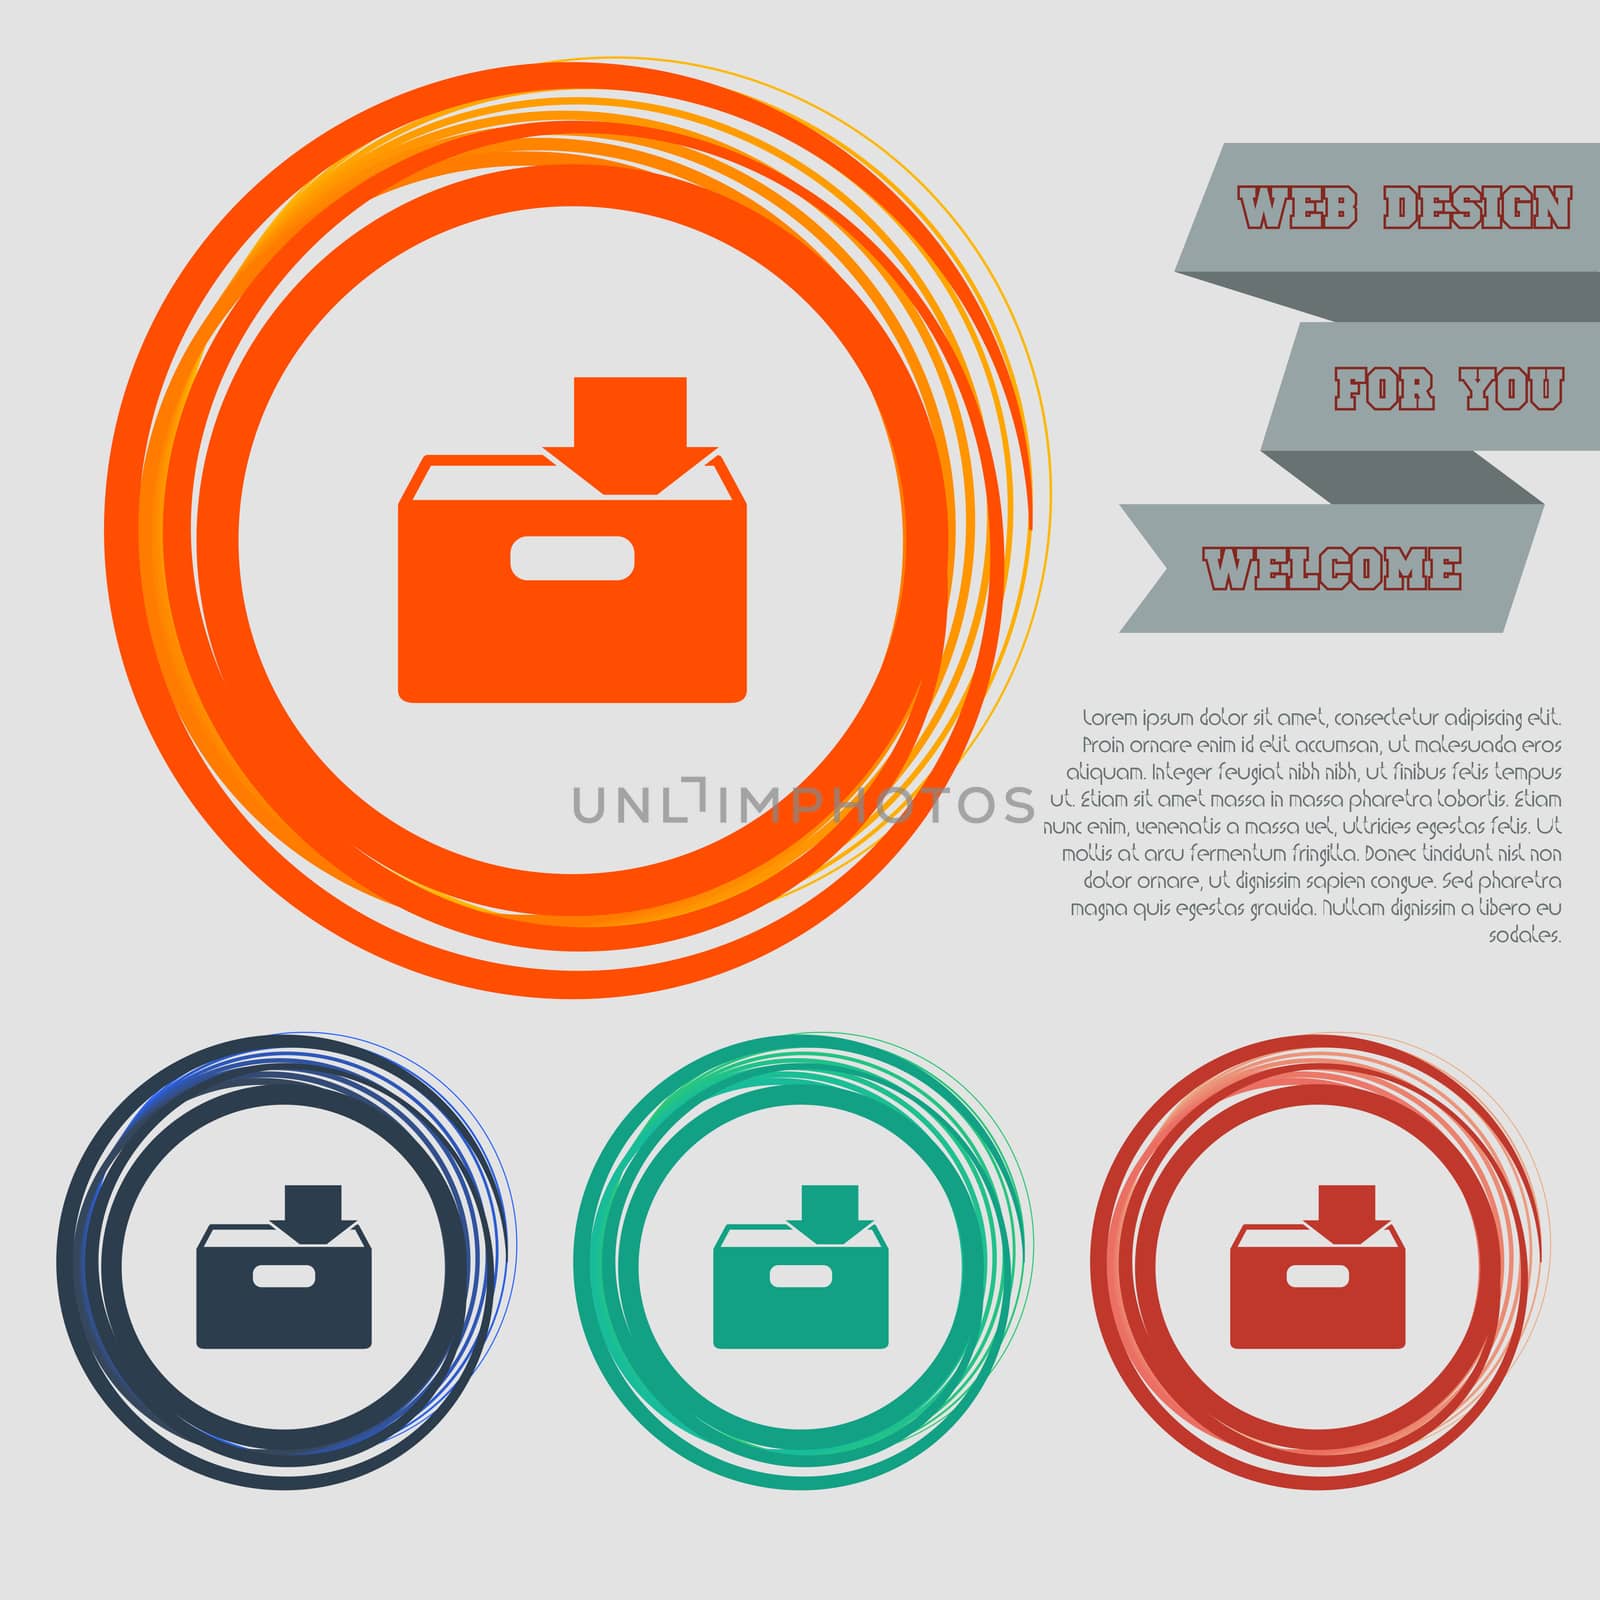 download to hdd icon on the red, blue, green, orange buttons for your website and design with space text. illustration